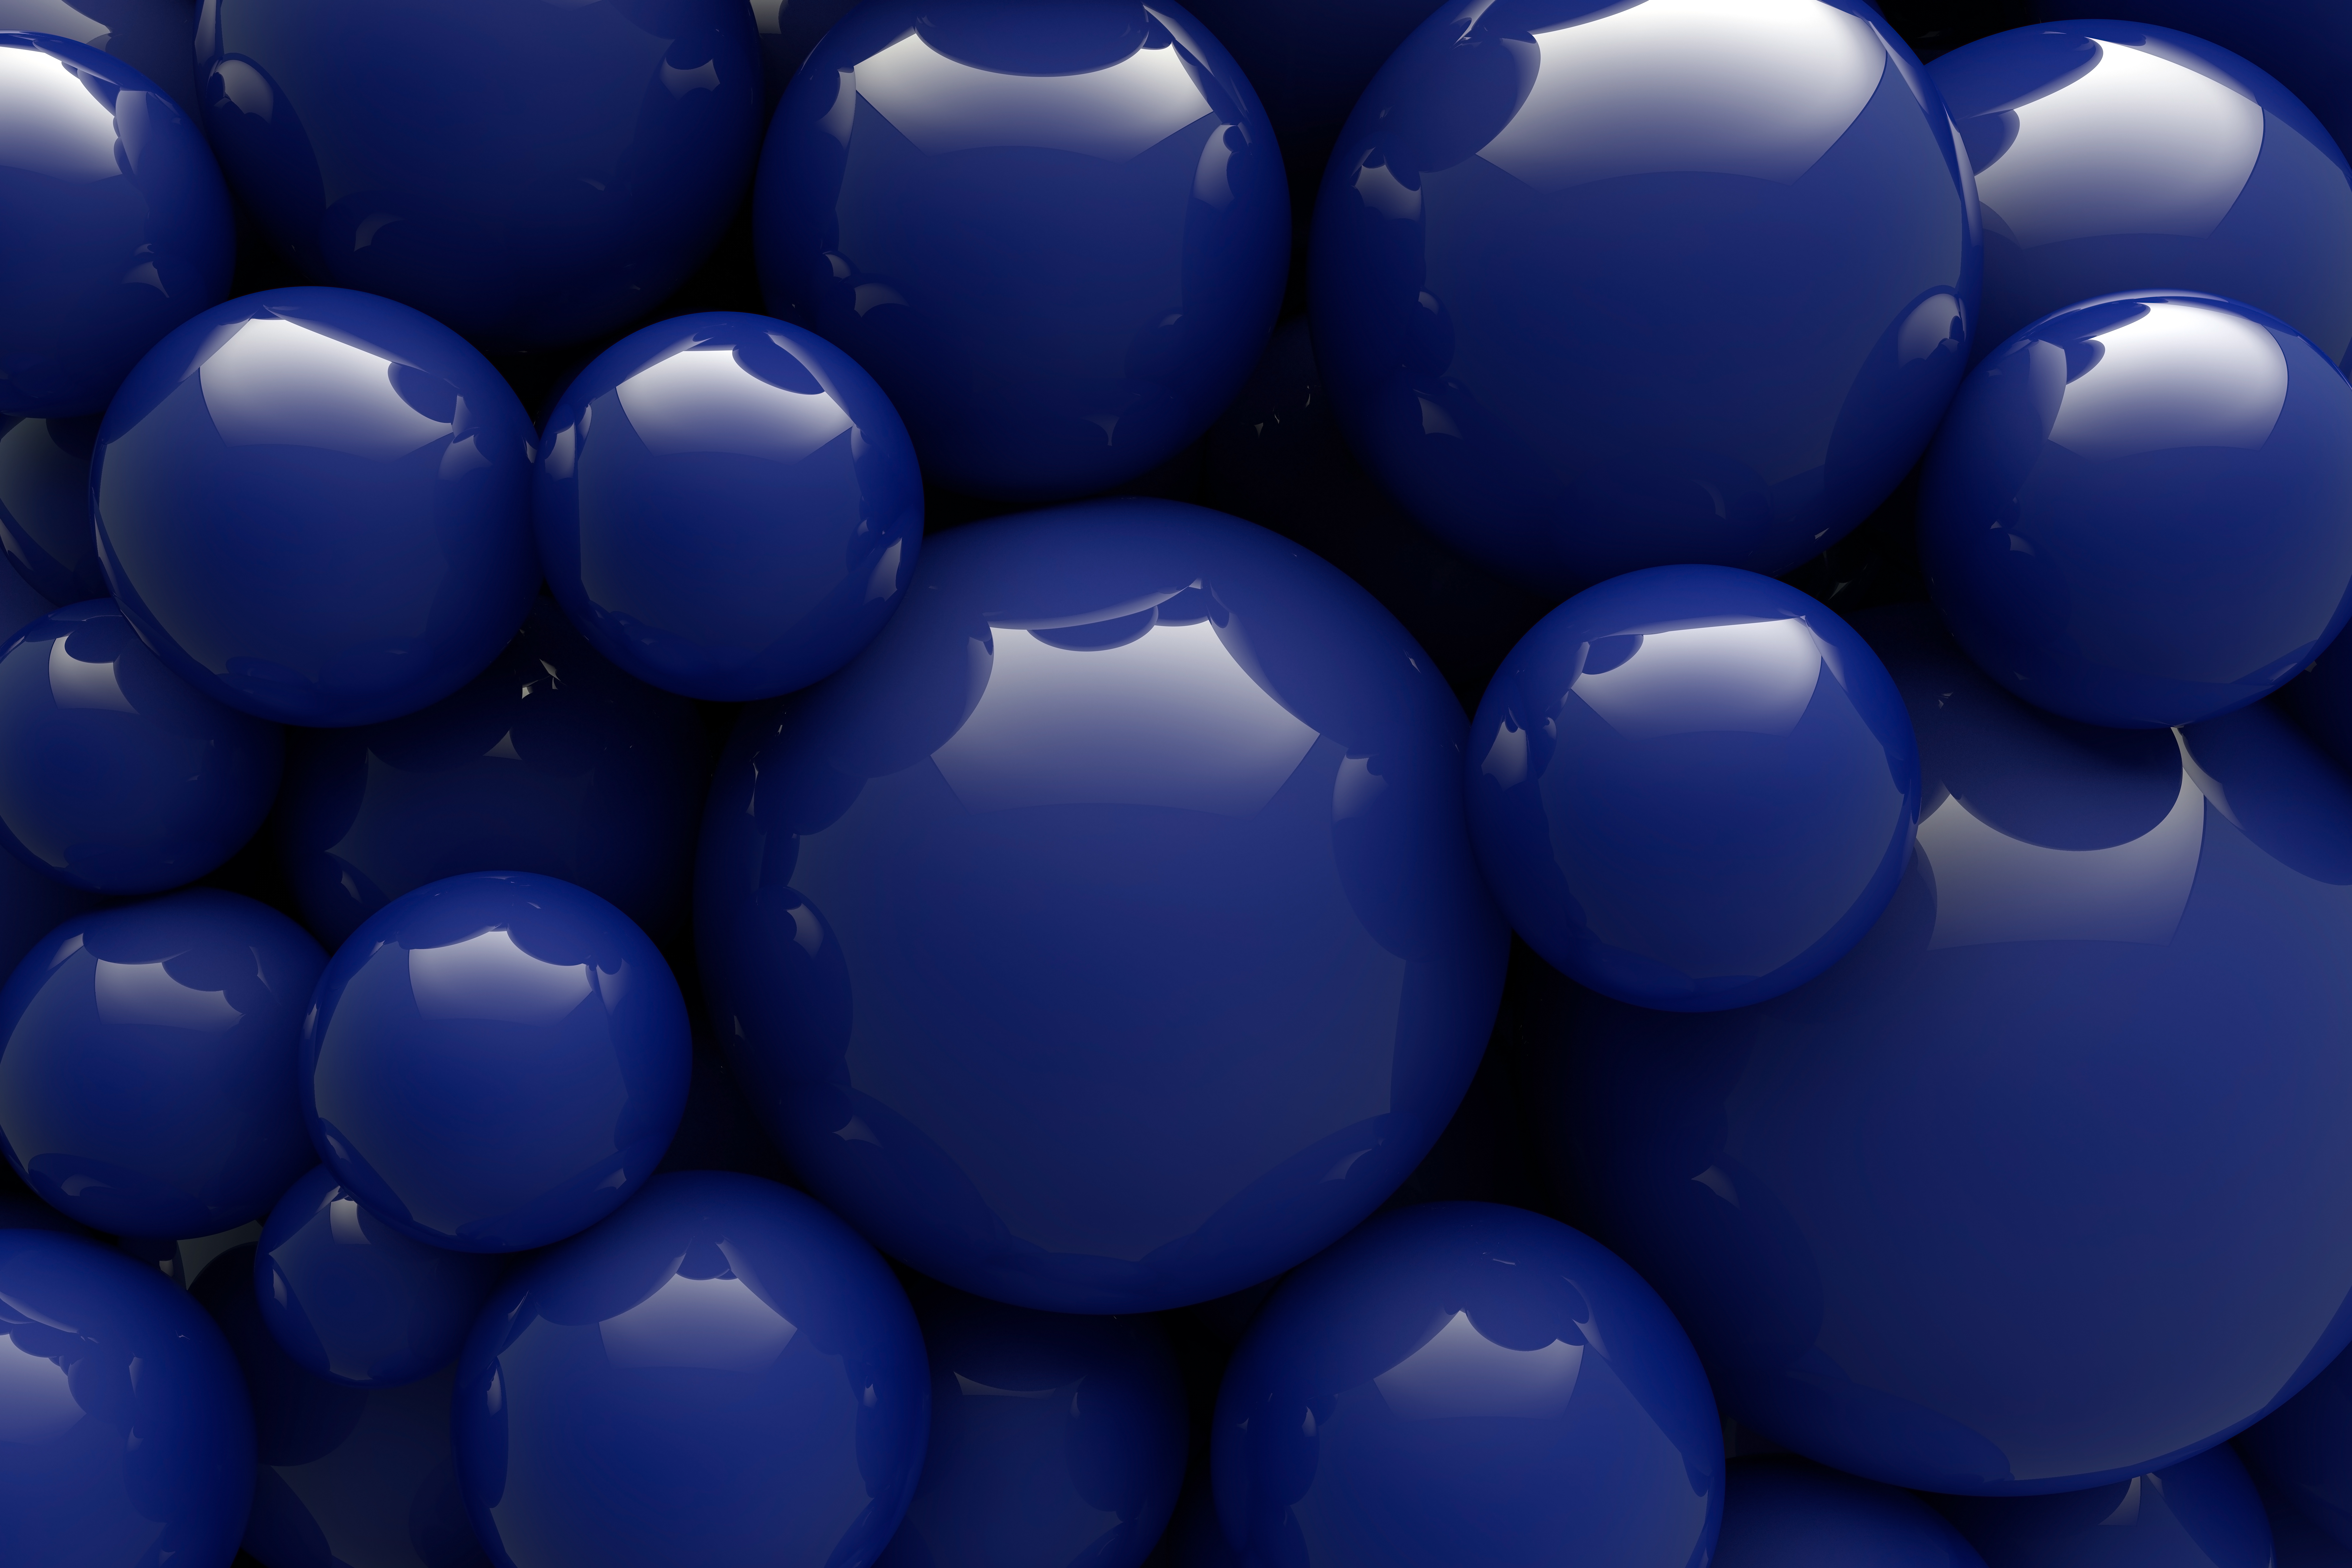 balls, 3d, blue, smooth, form lock screen backgrounds